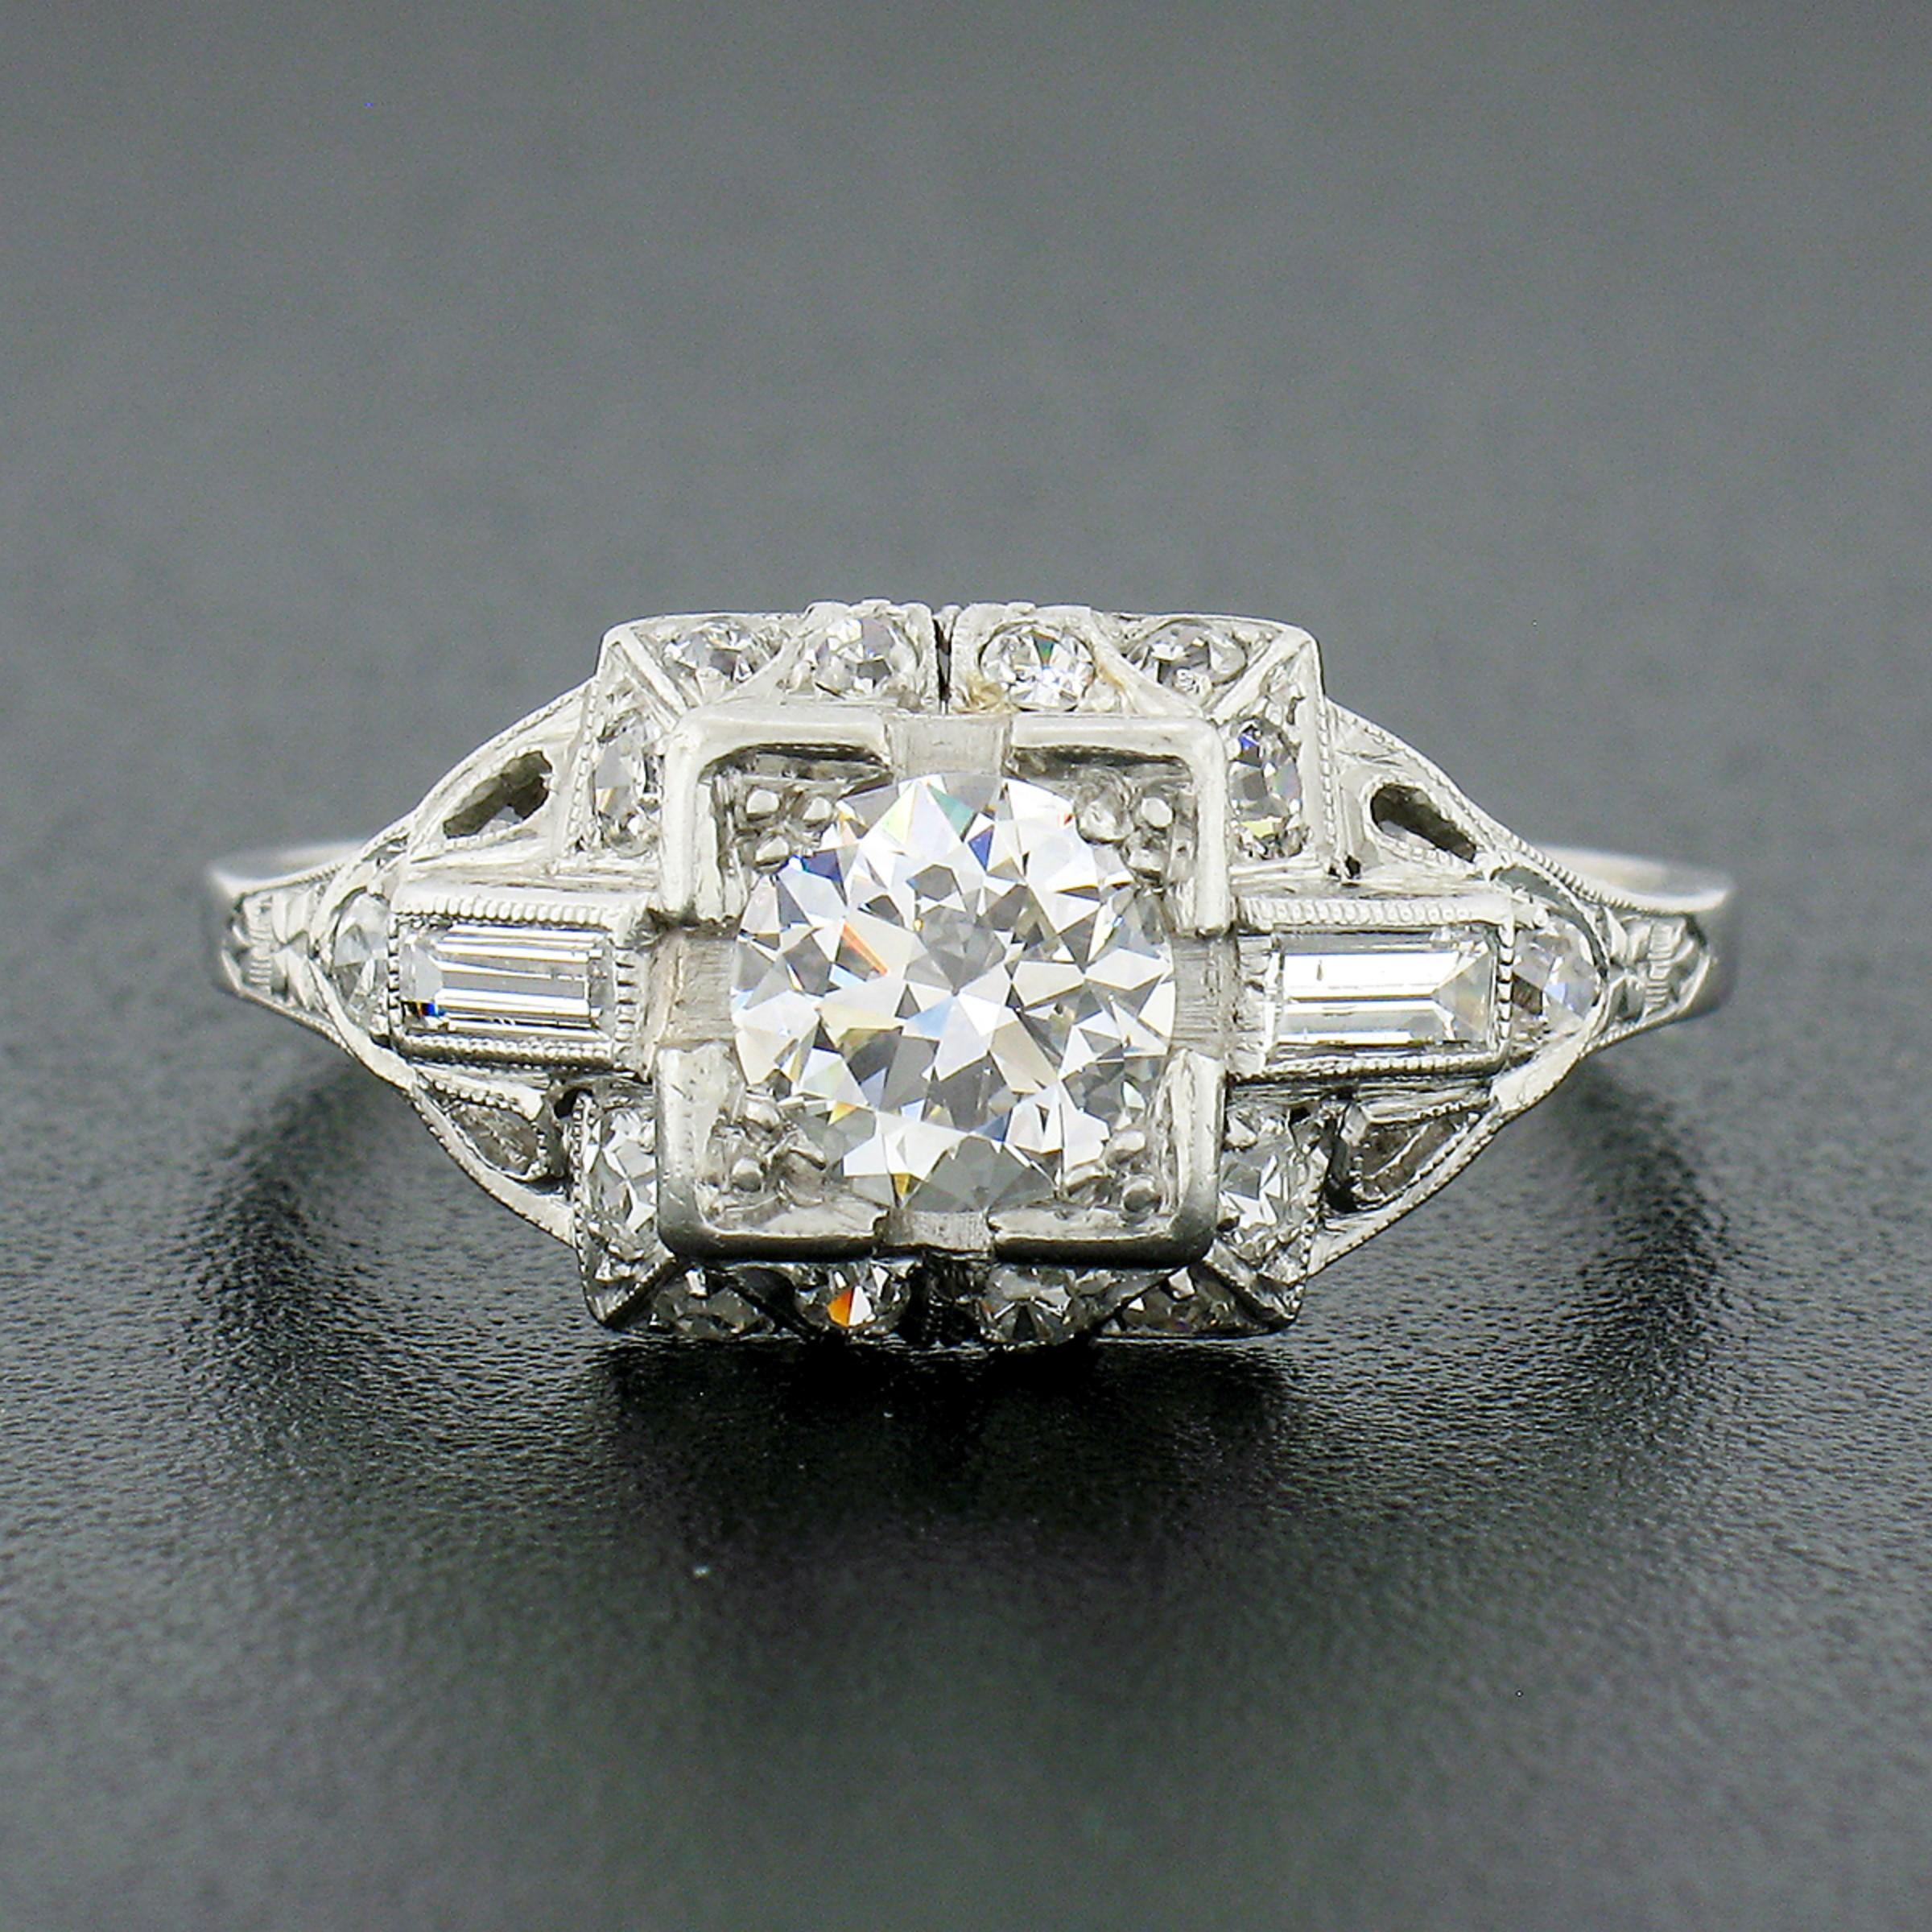 This breathtaking antique diamond engagement ring was crafted from solid platinum during the art deco period and features a stunning, old European cut, diamond solitaire at its center. The fine diamond solitaire shows a nice large size and